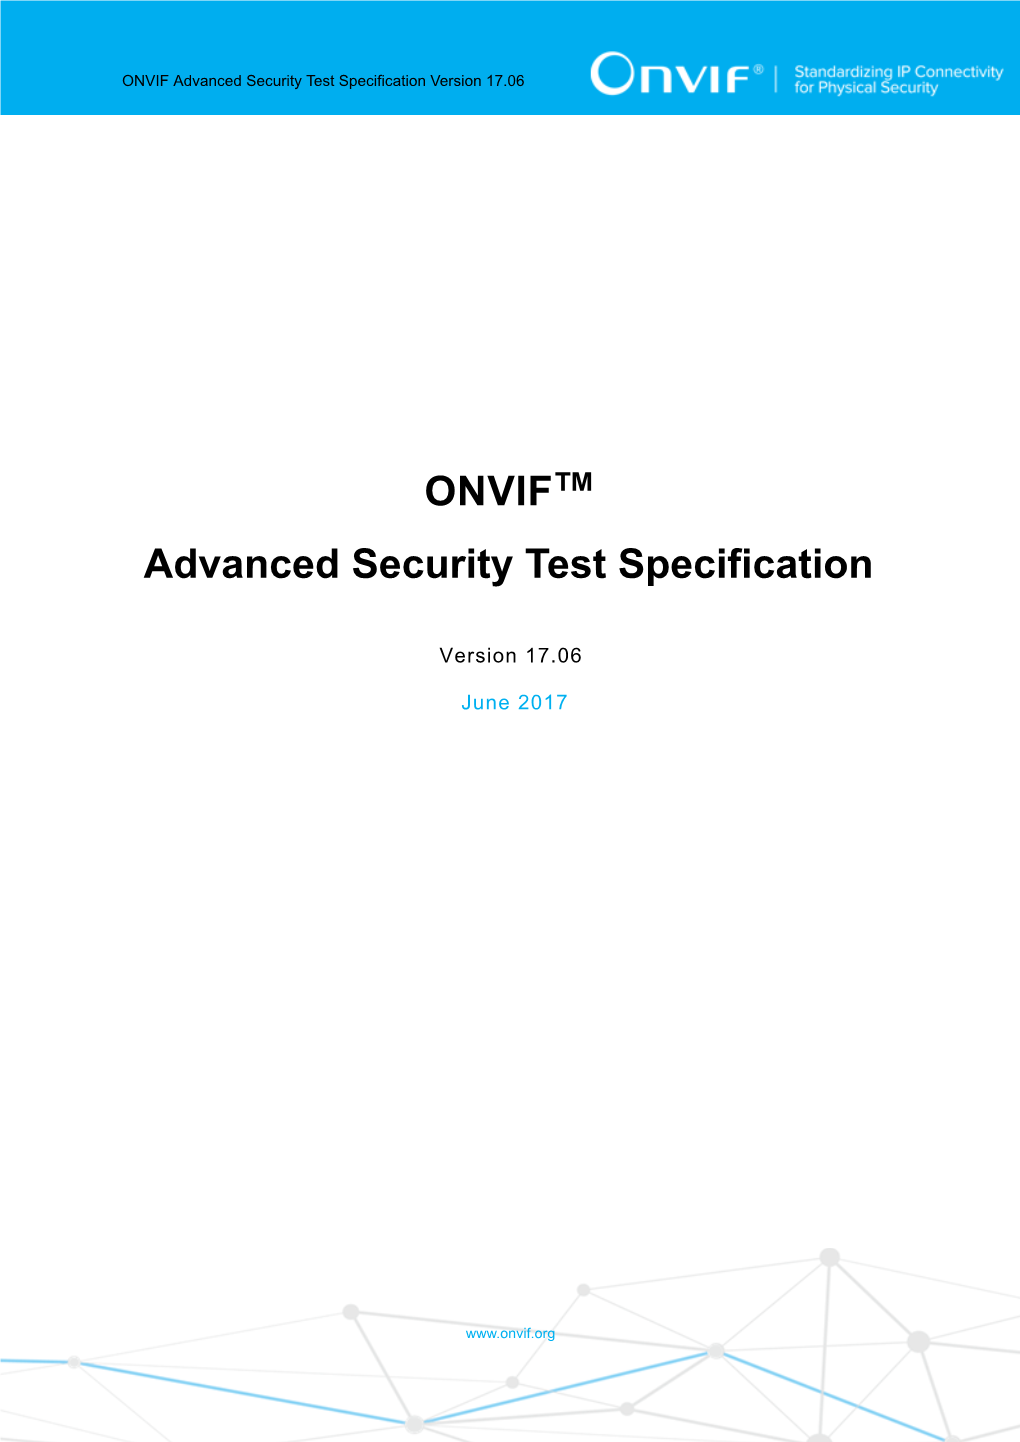 ONVIF™ Advanced Security Test Specification